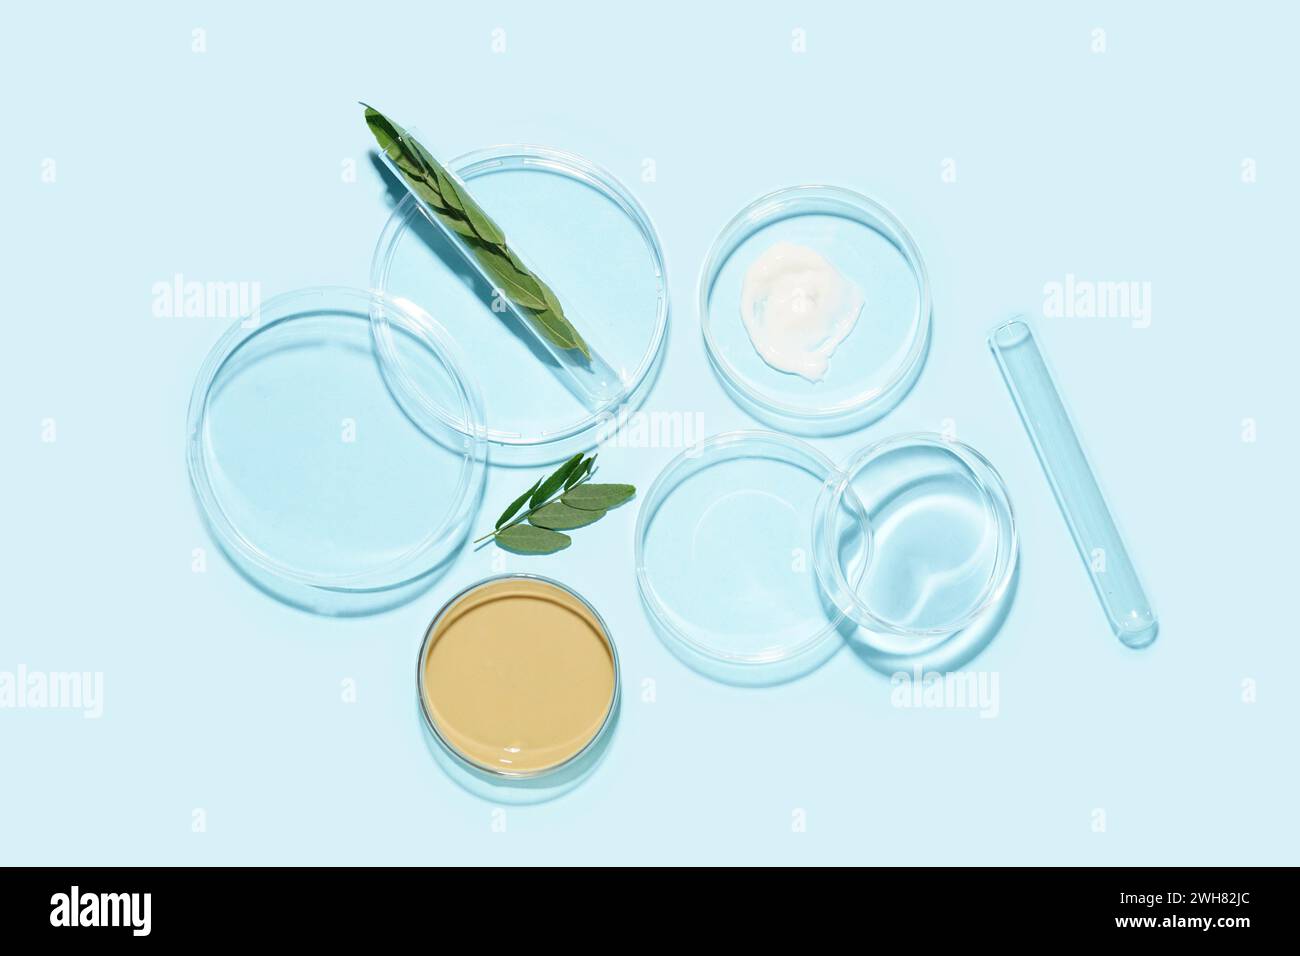 Petri dishes with sample, jar of cosmetic product and plant leaves on blue background Stock Photo